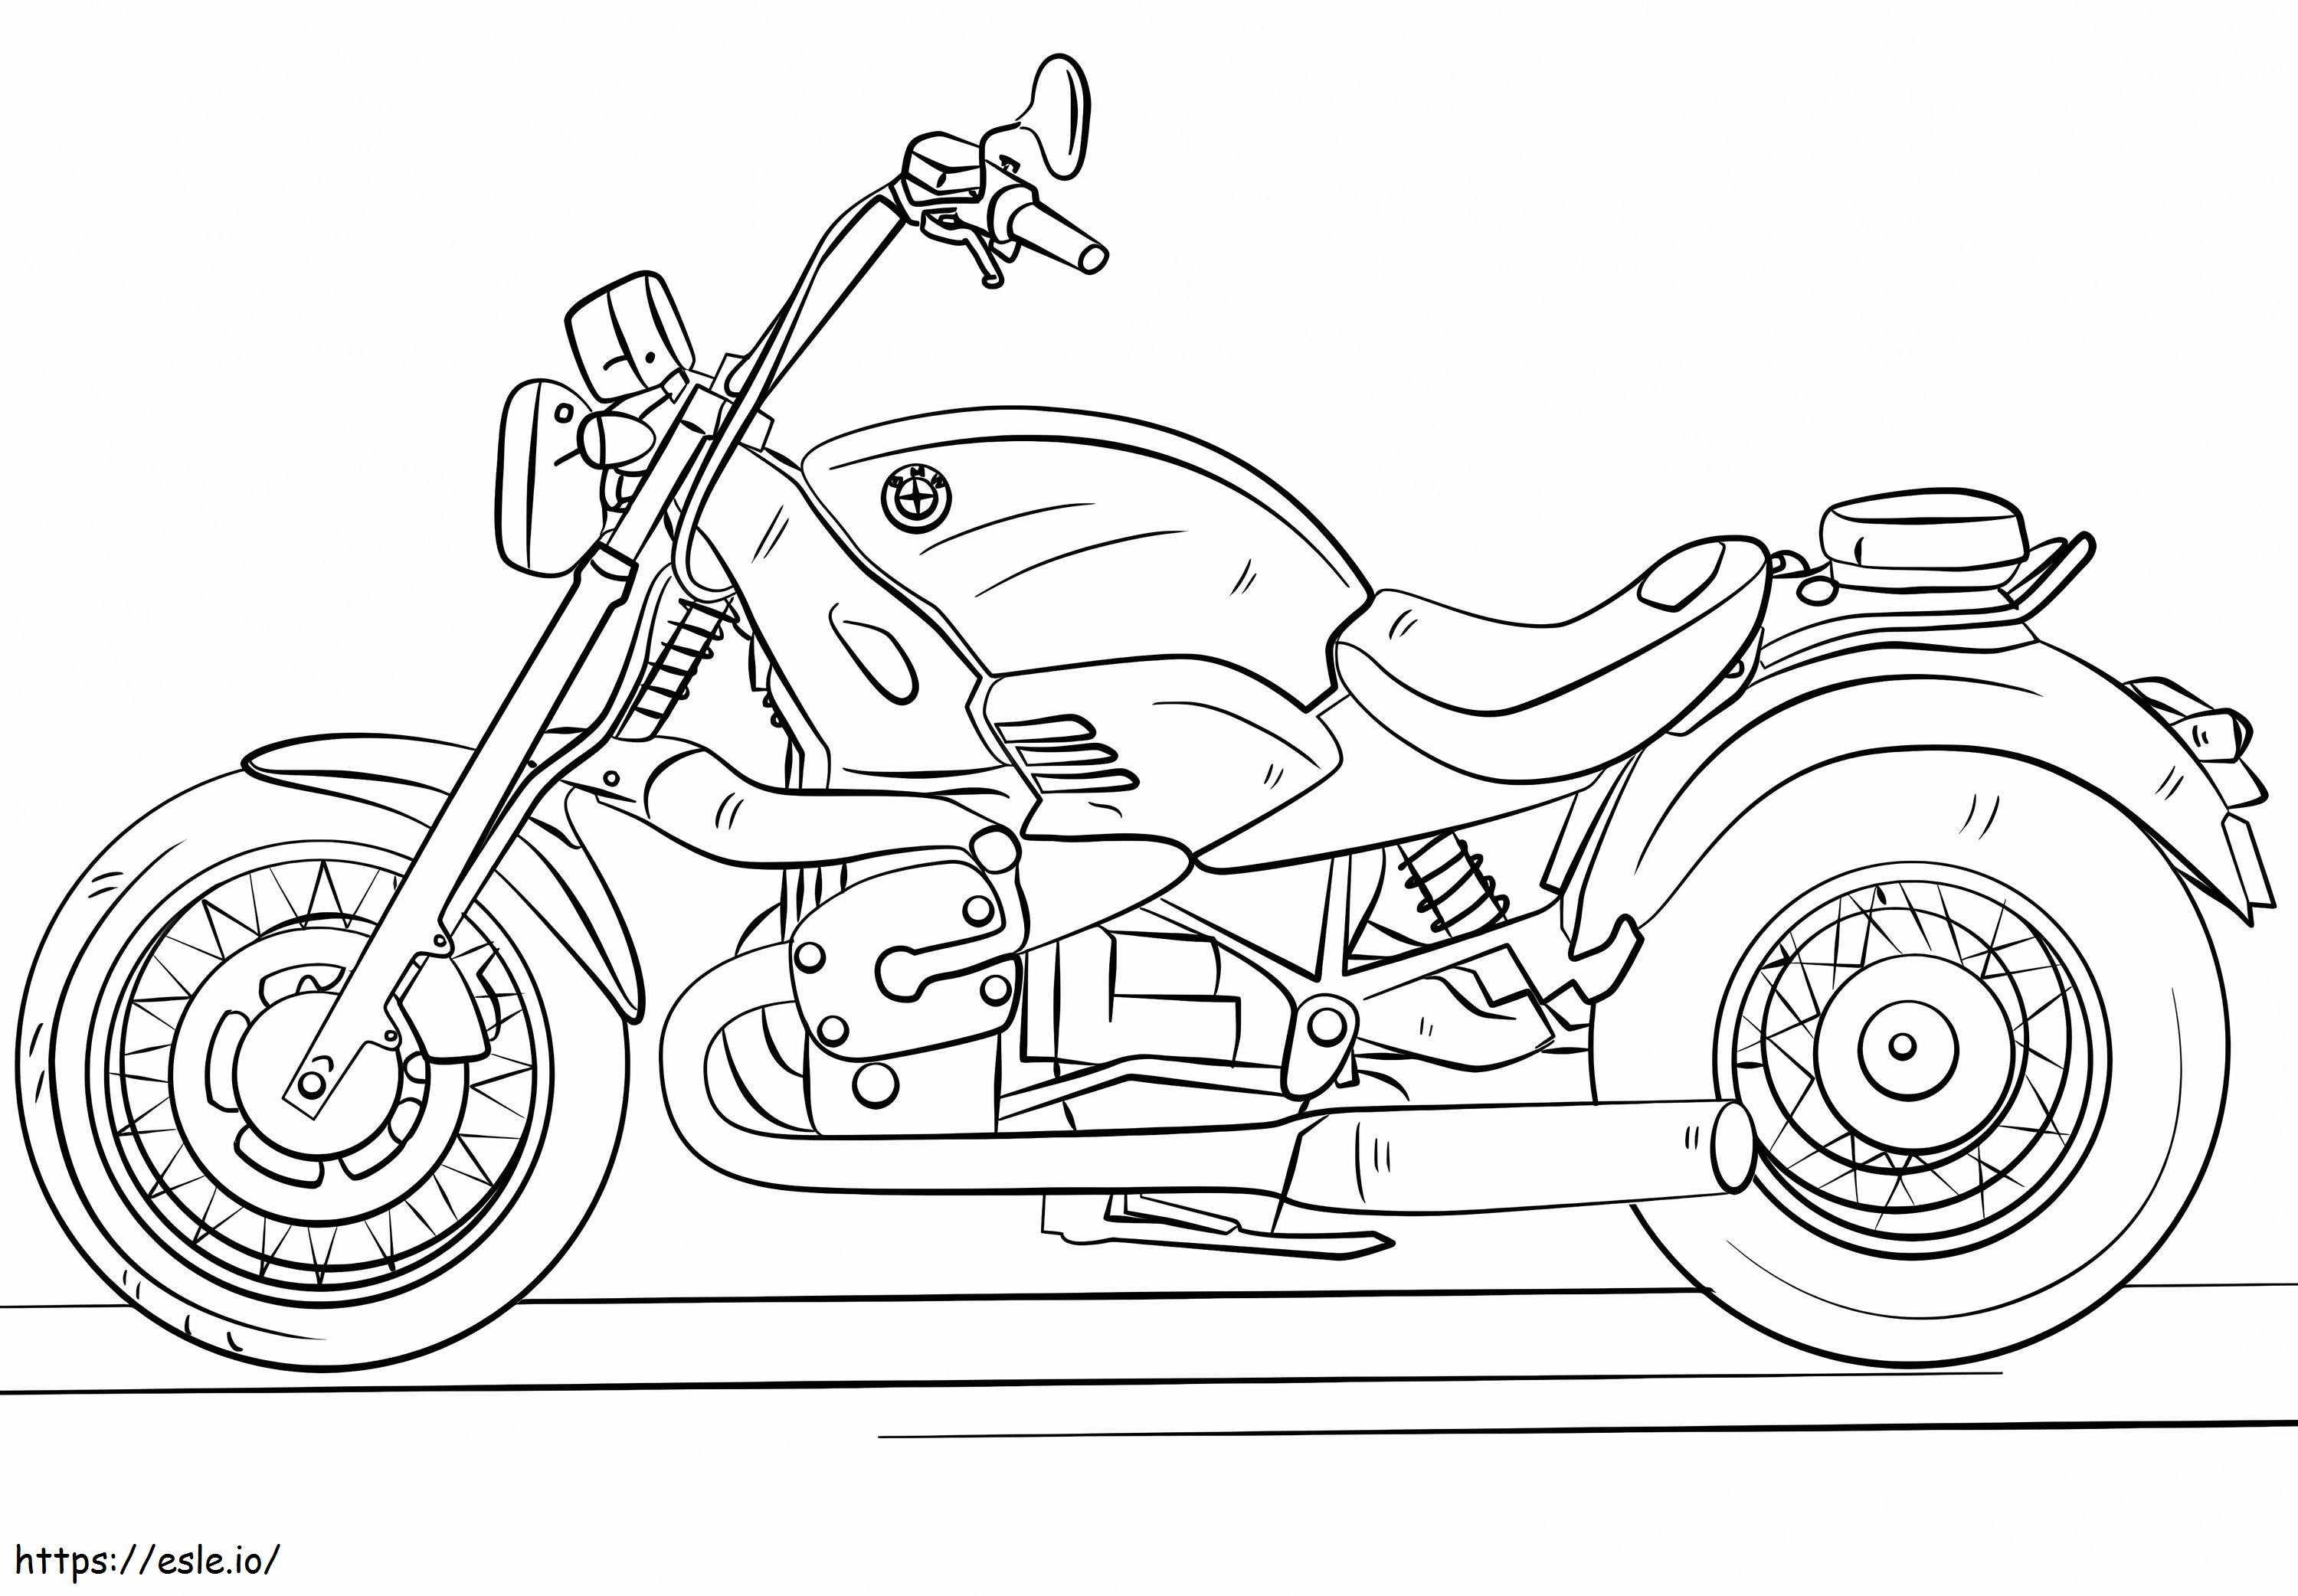 Bmw Motorcycle coloring page